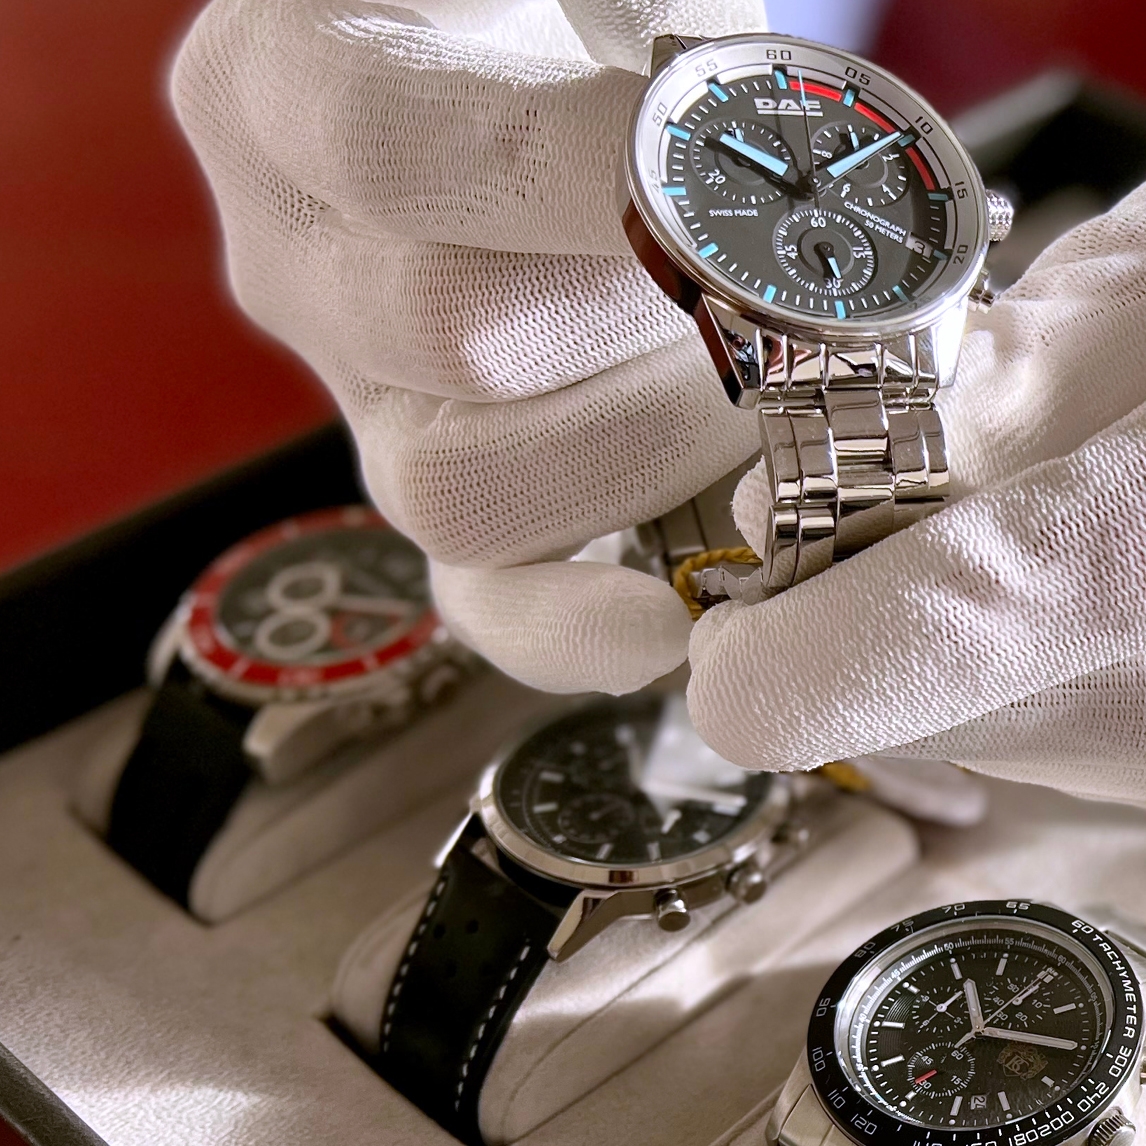 Watch Branding - Create custom watches with expert consultation. Get started by sharing key details such as quantity, budget, and style preferences. Our A to Z service ensures a tailored approach to meet your unique needs